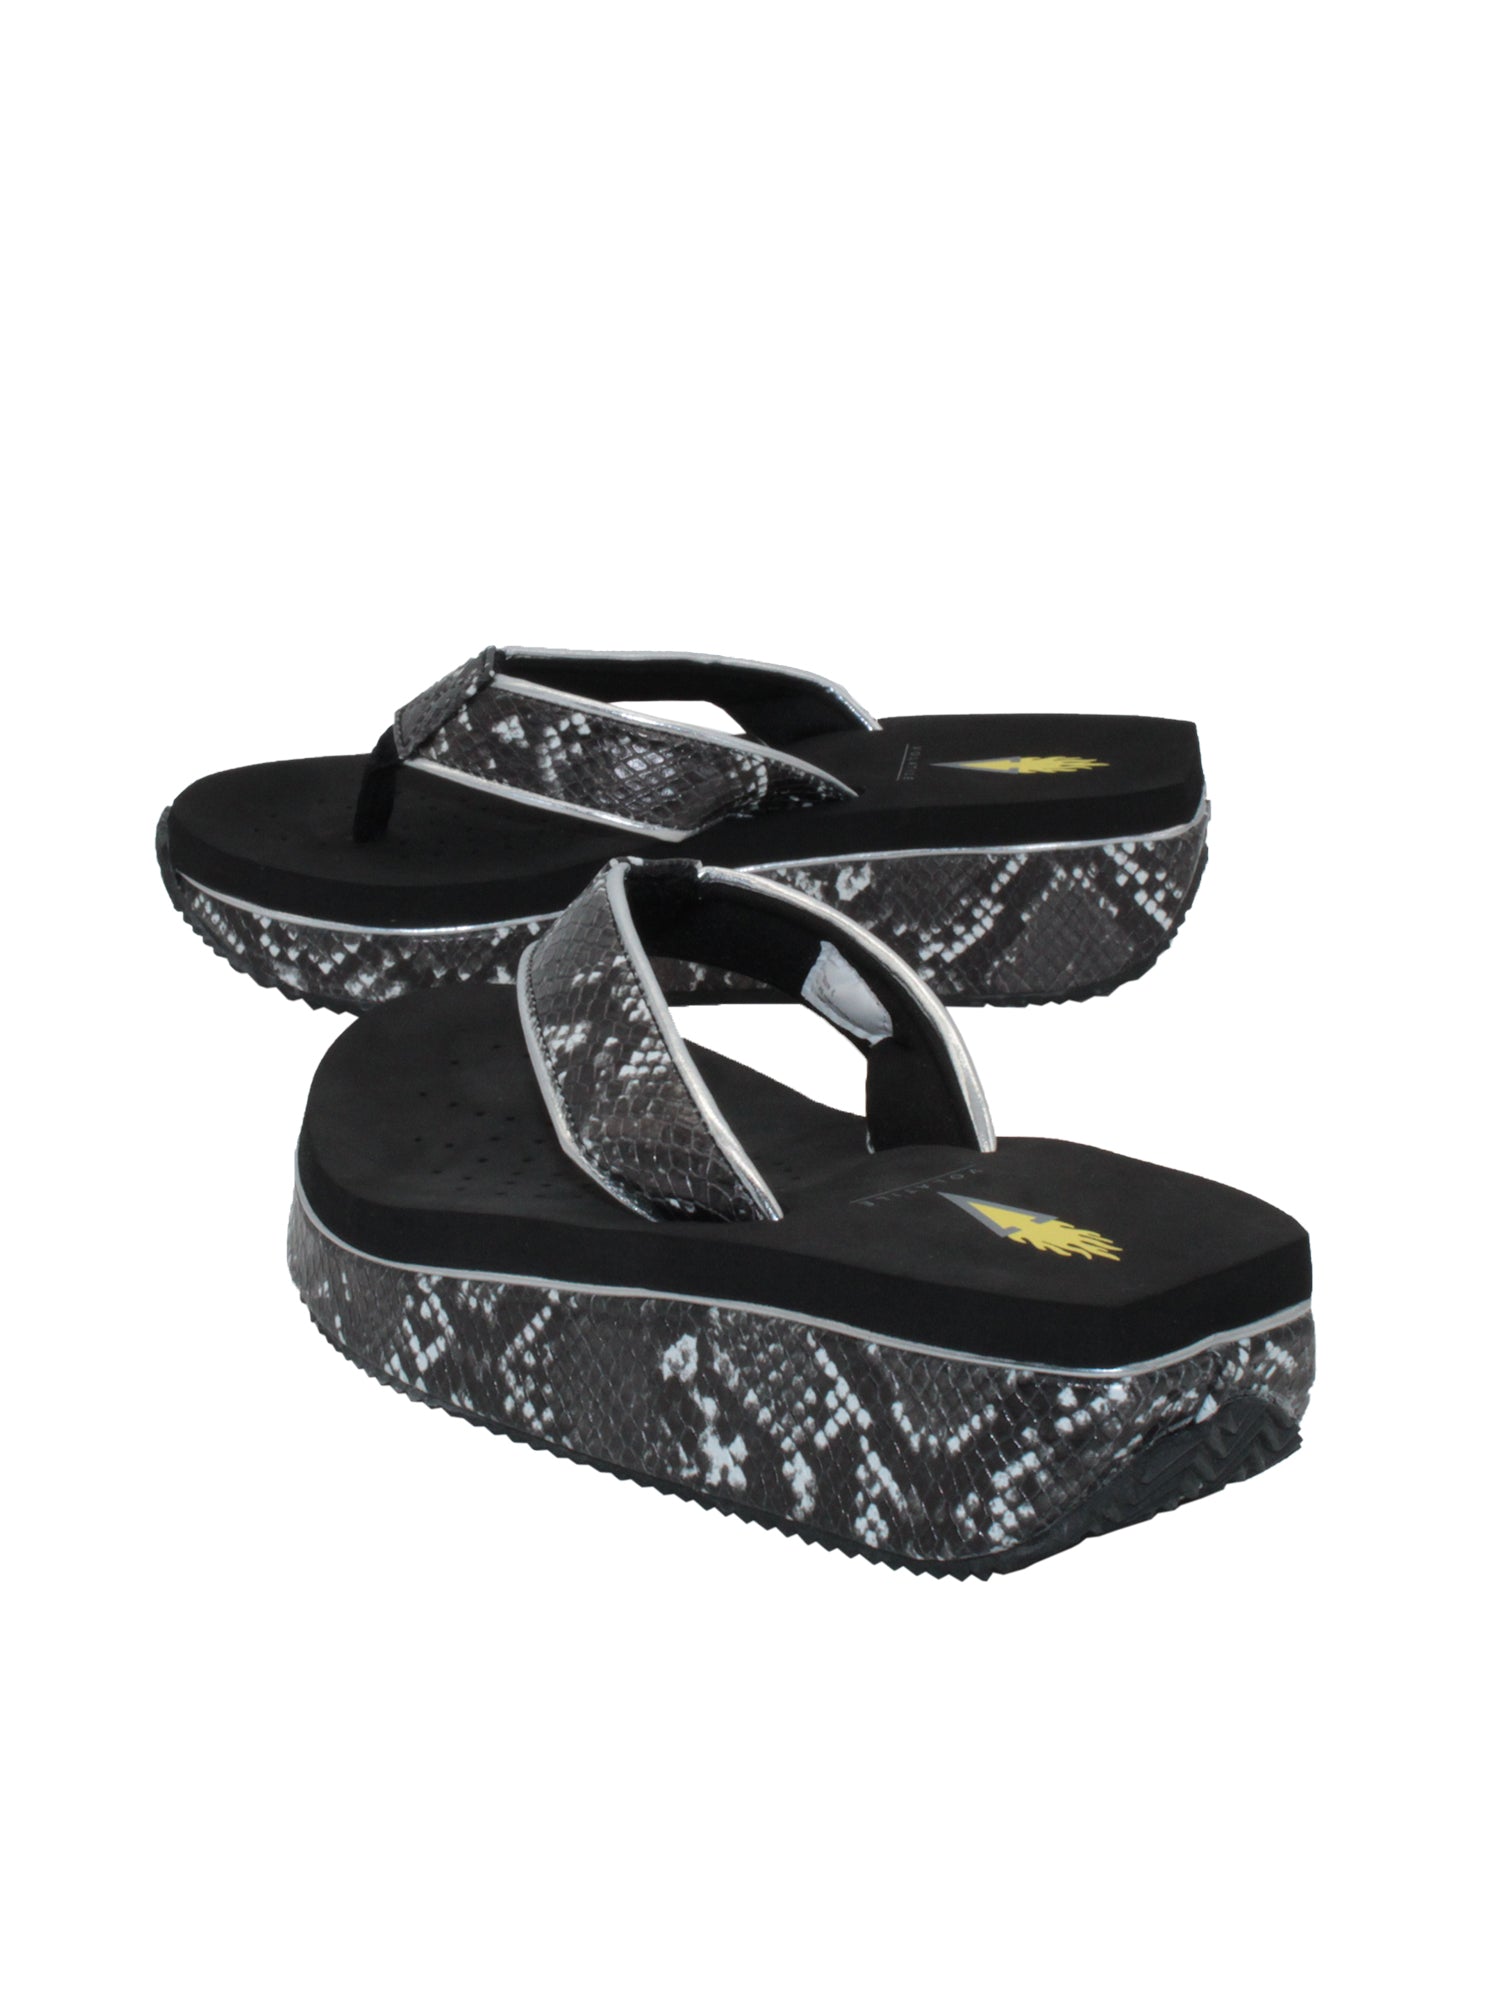 Faux snakeskin upper Soft webbed textile thong post Padded textile lining for comfort Slip-on thong wedge style Ultra-comfort EVA insole Round toe and squared off heel shape Rubber traction outsole Approx. 1.5” wedge heel height BACK